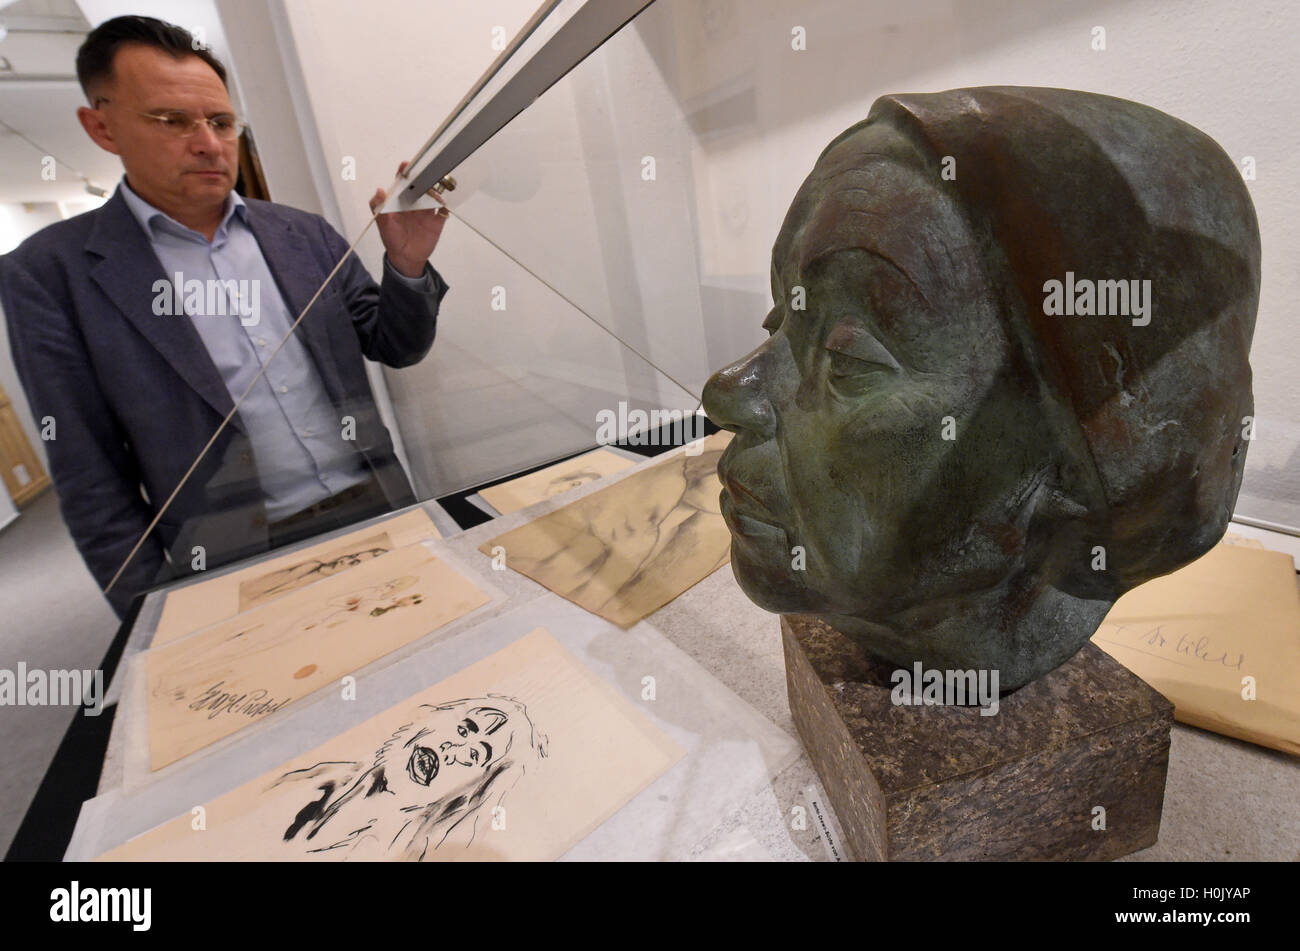 Museum director Carsten Niemann looks at the bust of Heinrich George's wife, Berta Drews, in the exhibition 'Heinrich George. An Encounter' in the Theatre Museum in Hanover, Germany, 21 September 2016. From 22 September to 11 December 2016, the Theatre Museum is showing the exhibition 'Heinrich George. An Encounter' with partly never before-published documents. Numerous photographs, documents, and objects from the private property of the family of actors can be seen. Photo: HOLGER HOLLEMANN/dpa Stock Photo